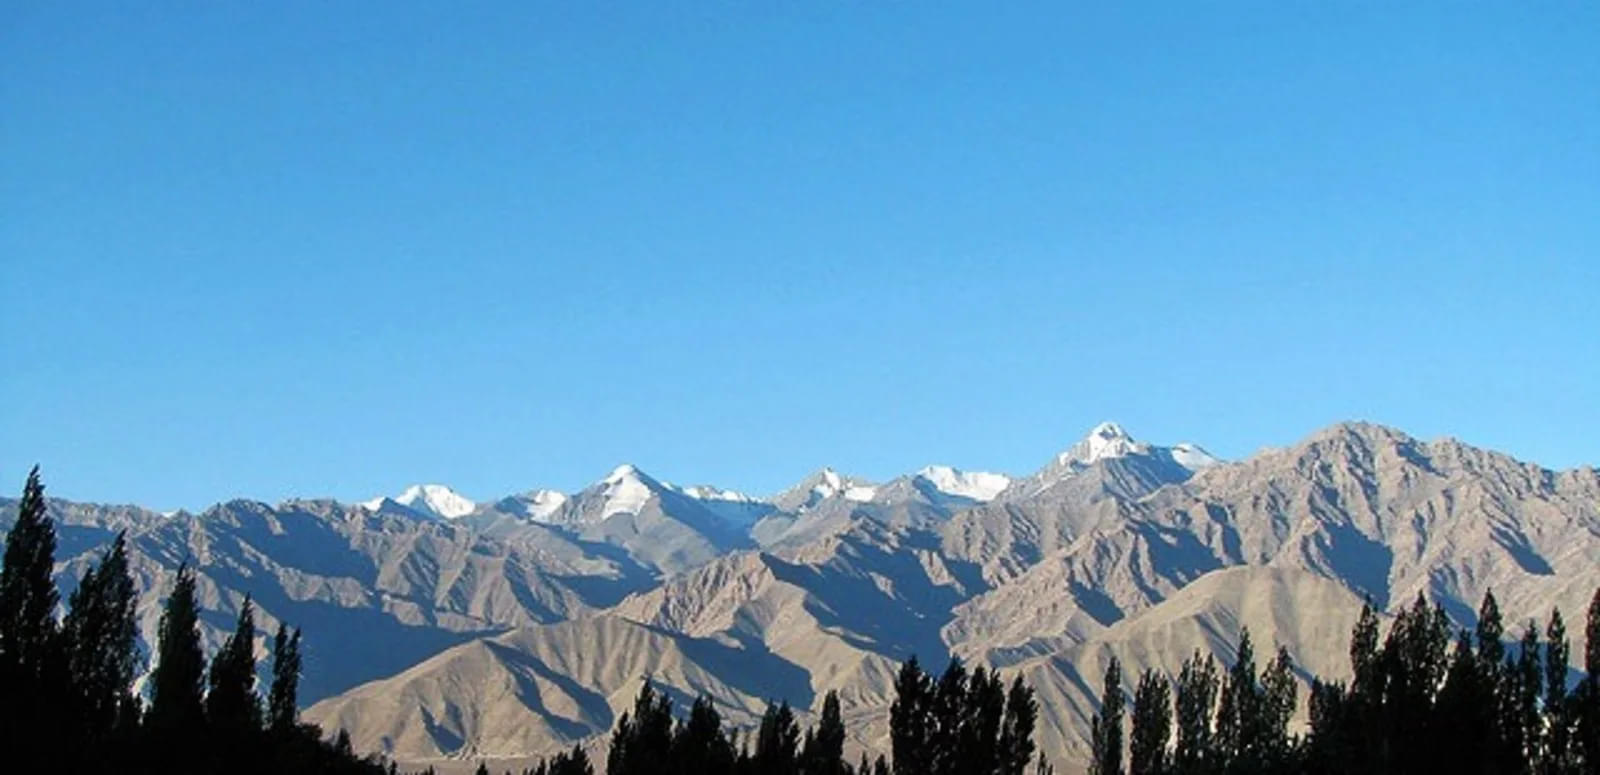 Bask in the warm sunshine and admire the stunning vistas of the Himalayas